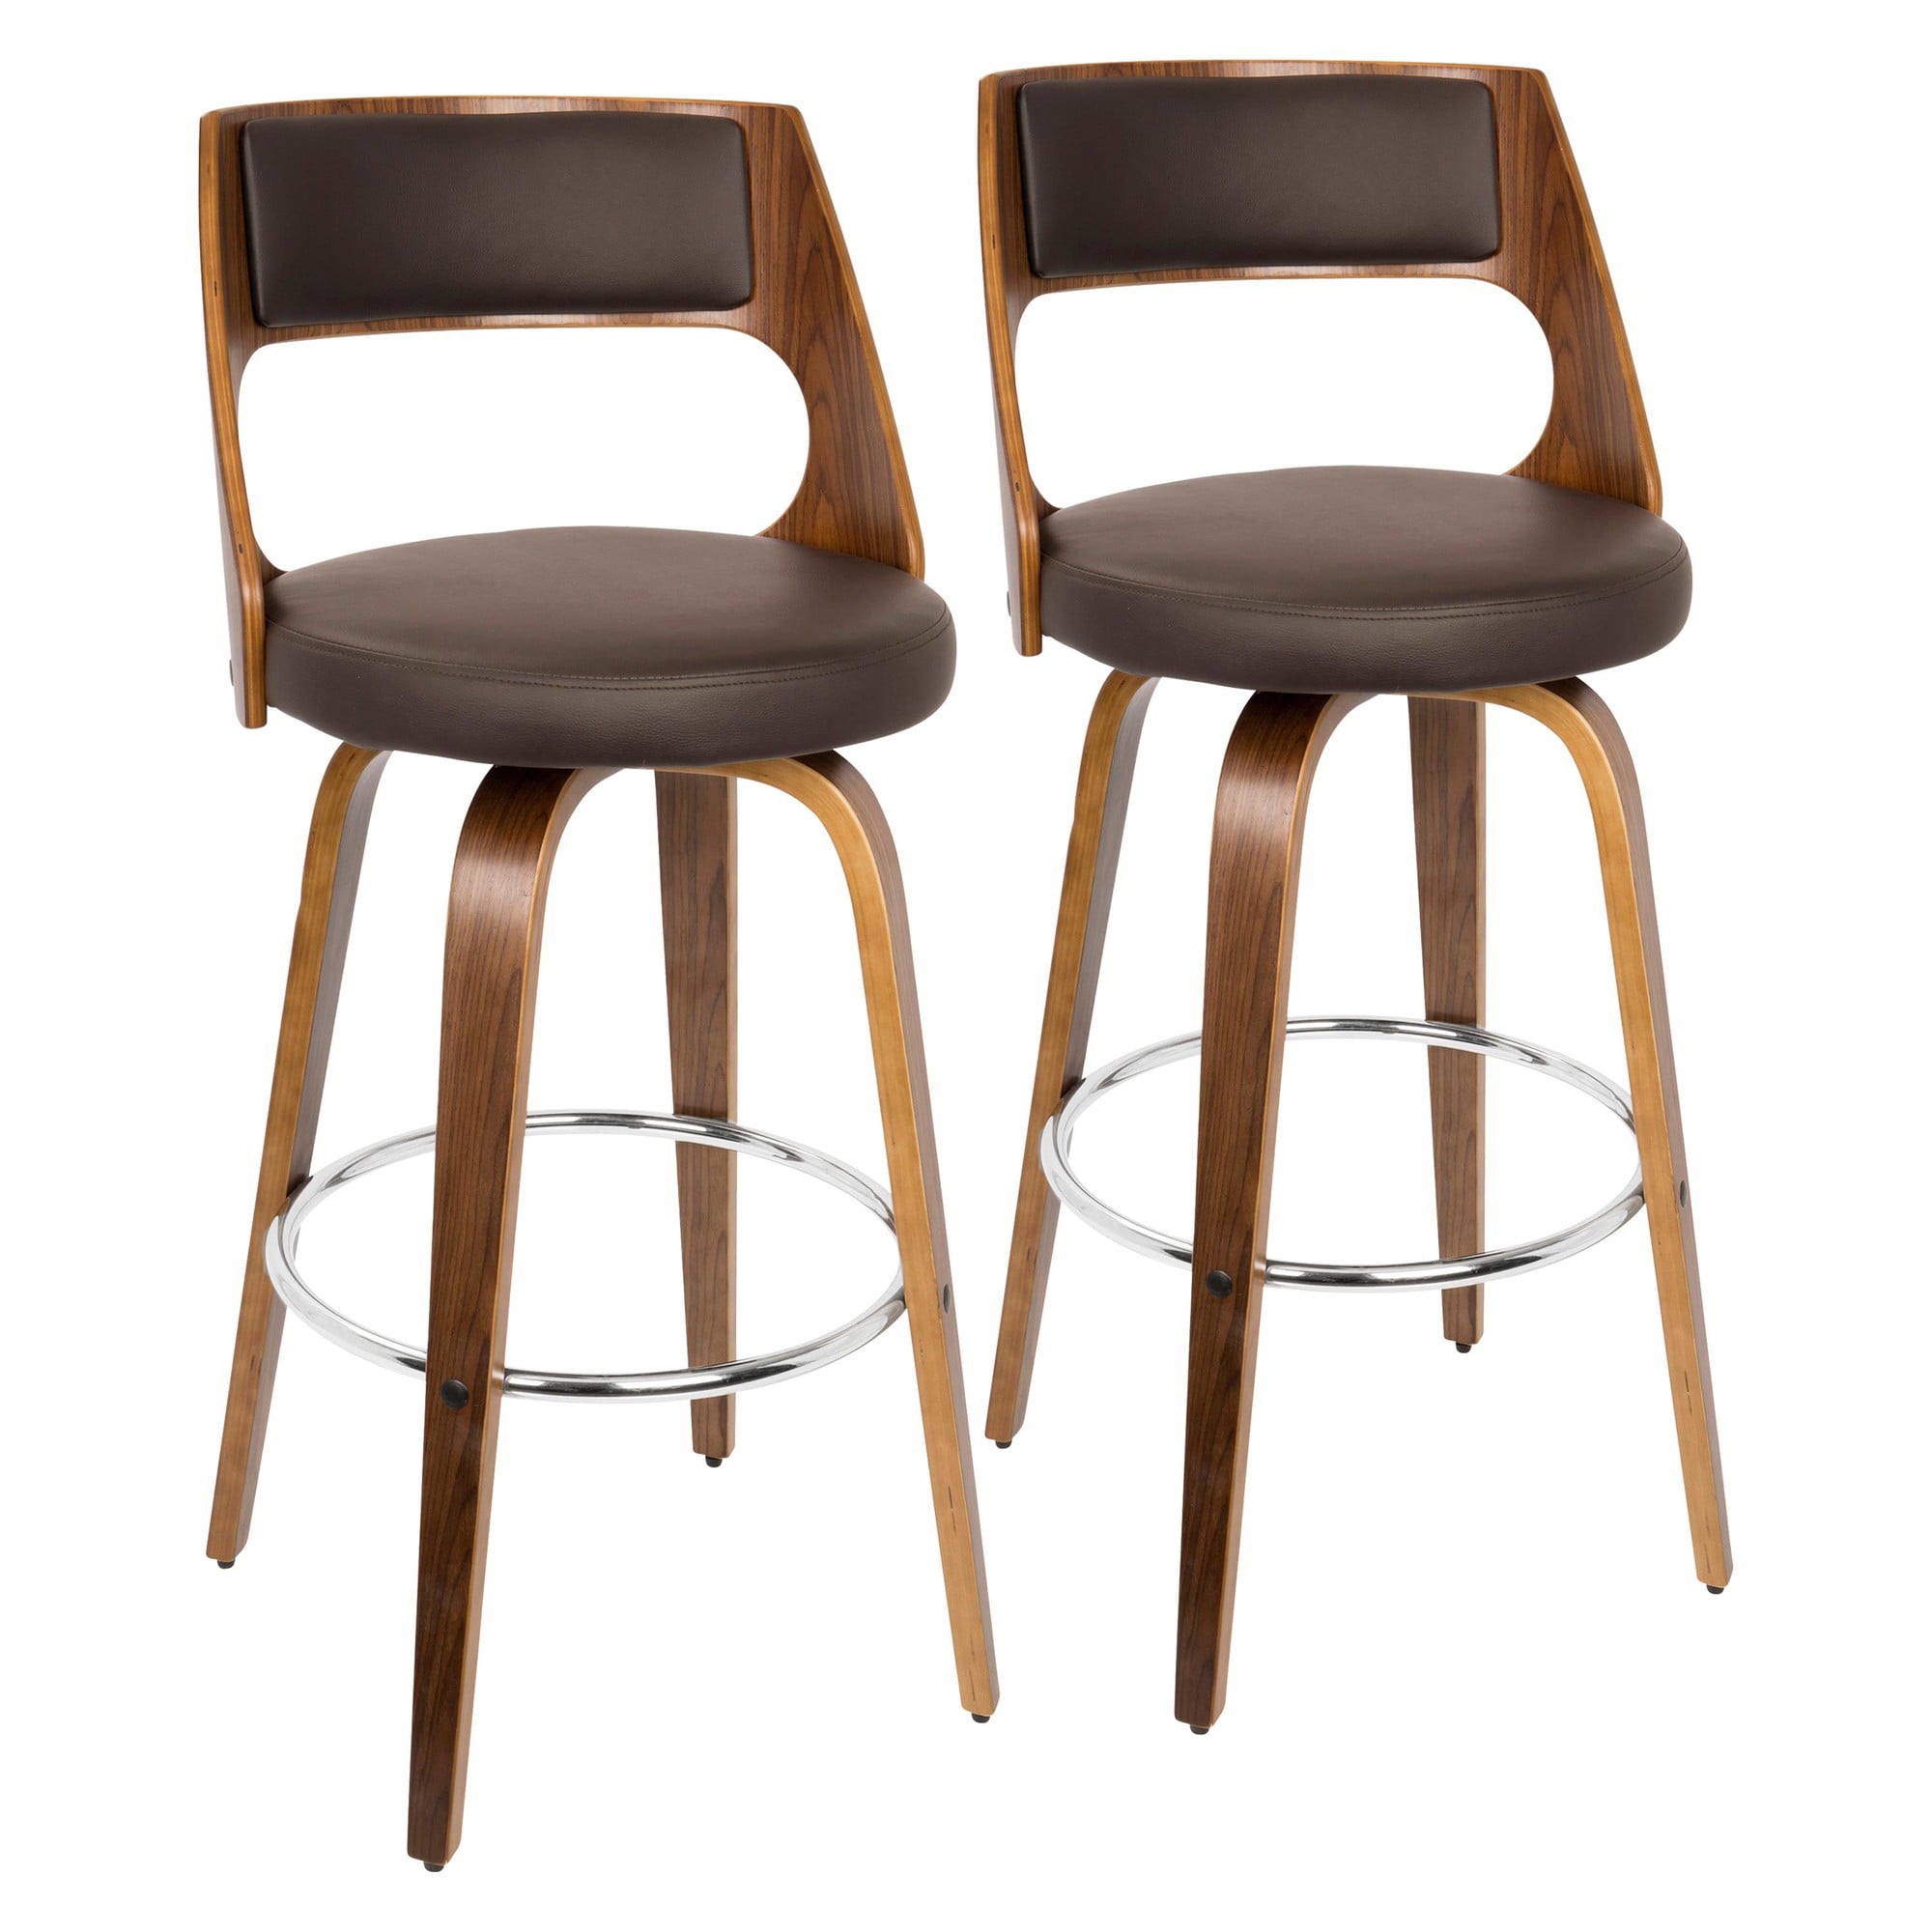 Grotto Mid Century Modern Counter Stool, Grotto Bar Stool Walnut And Brown